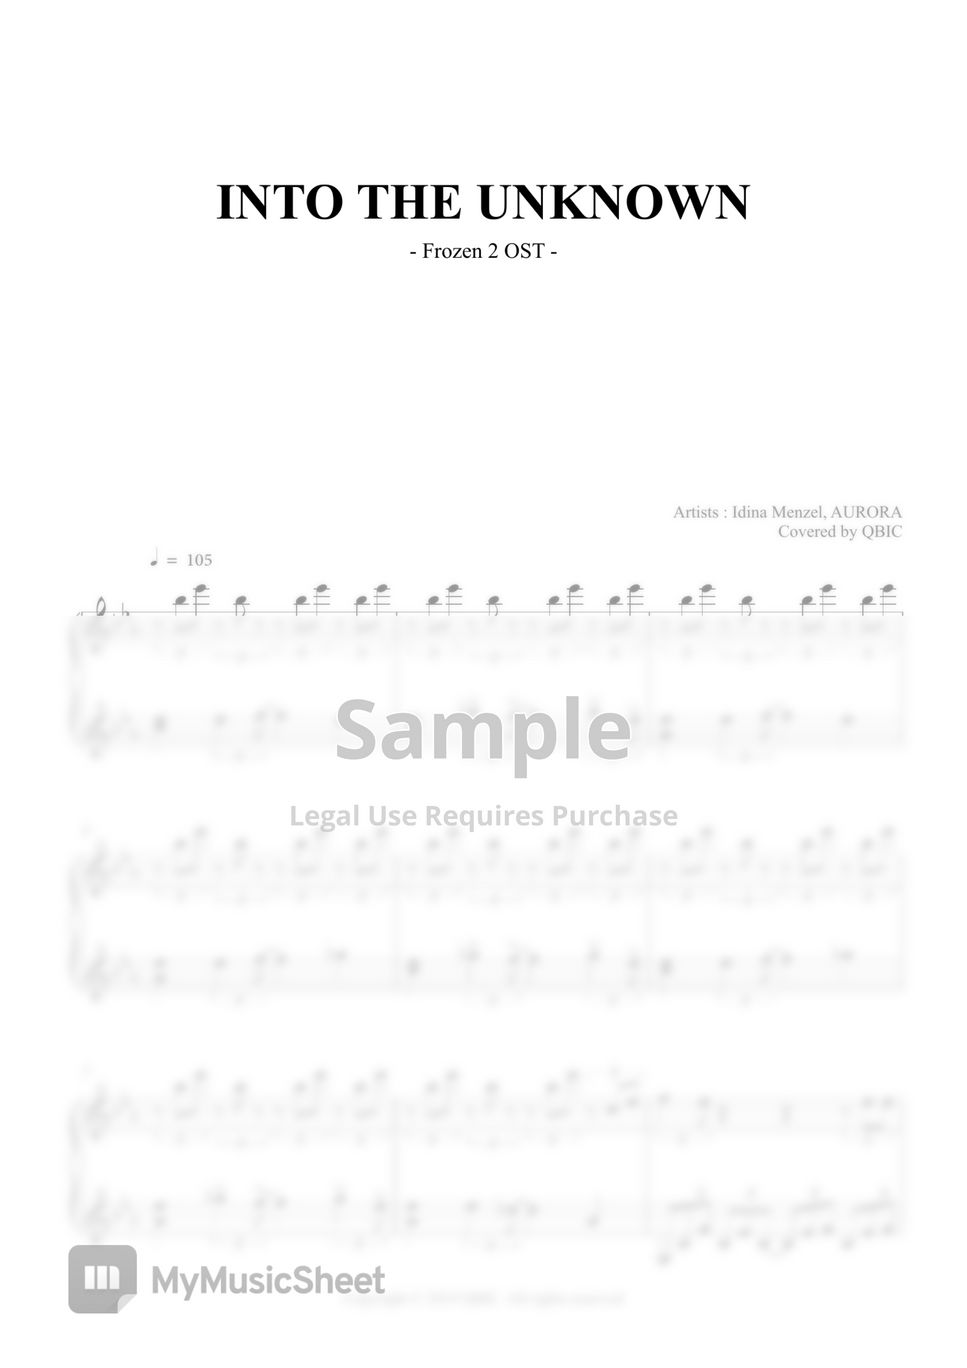 Frozen 2 OST - Into the unknown by QBIC